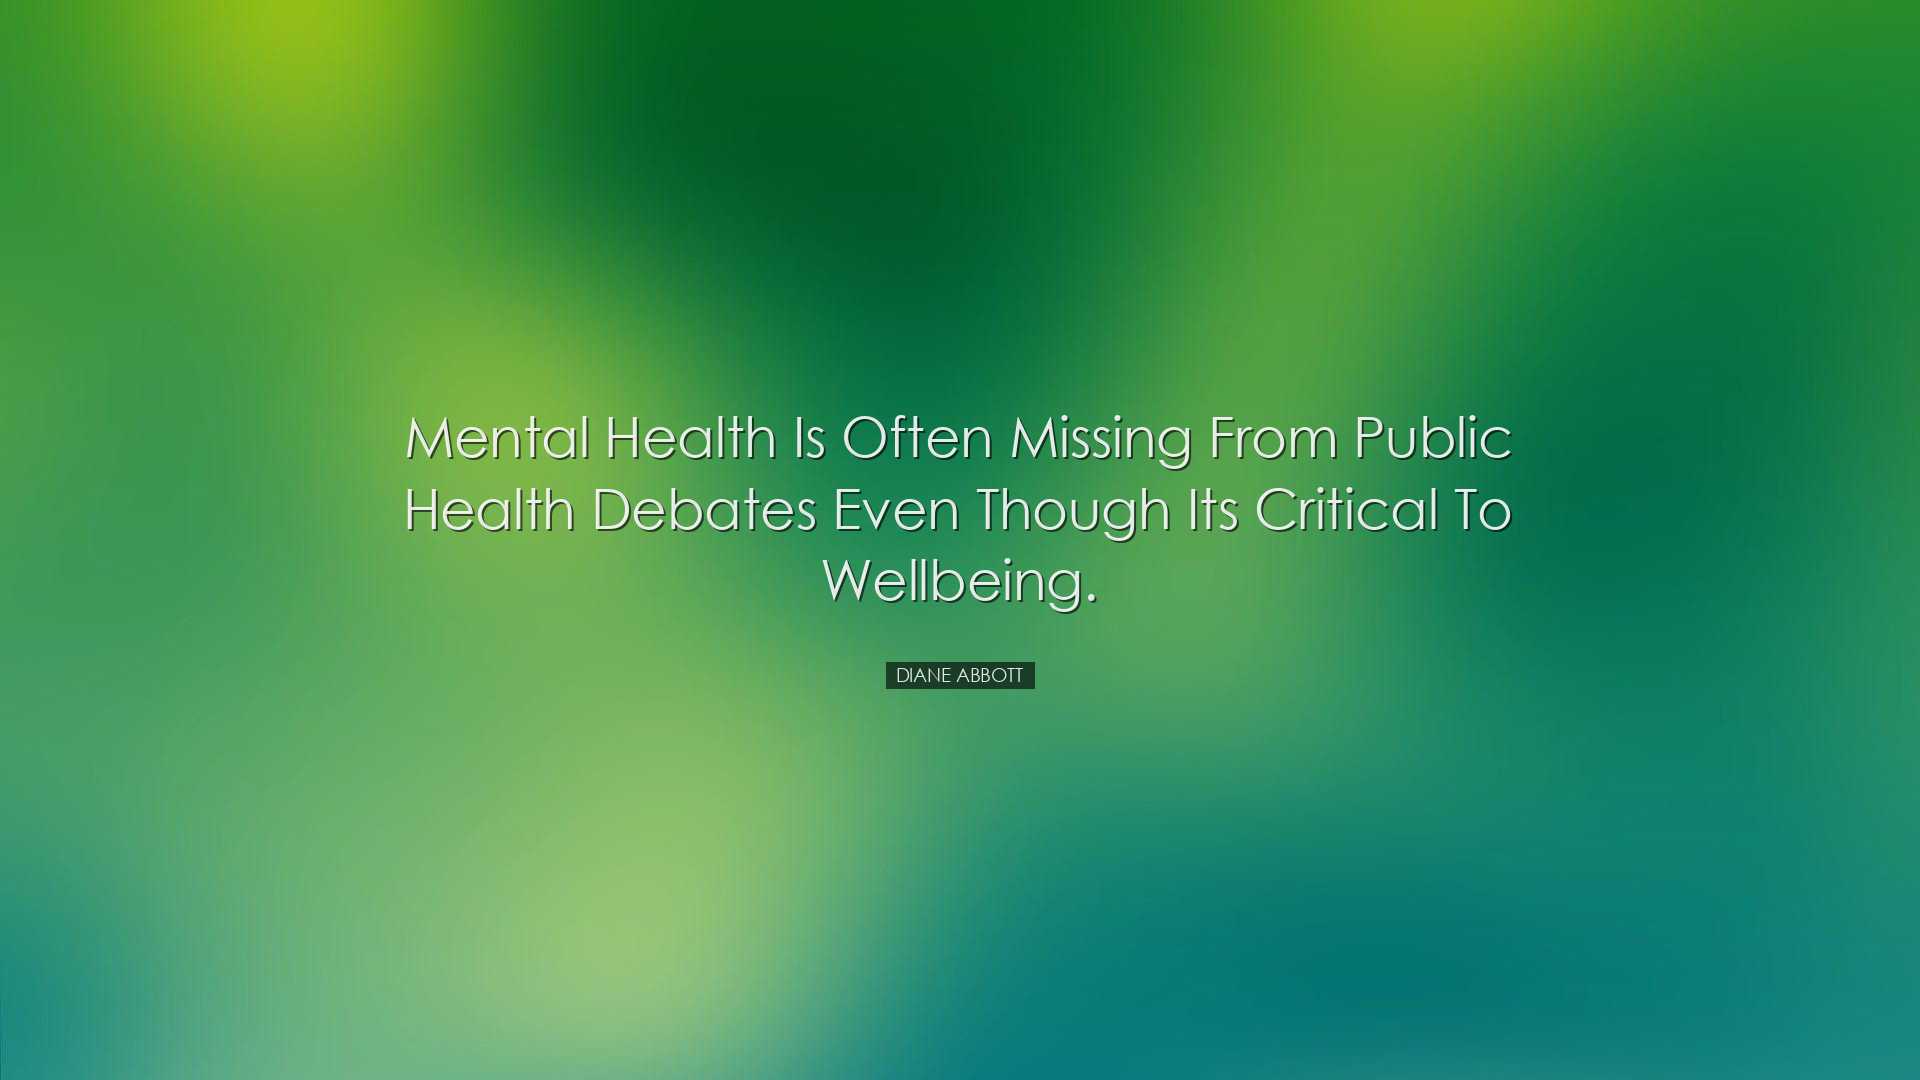 Mental health is often missing from public health debates even tho